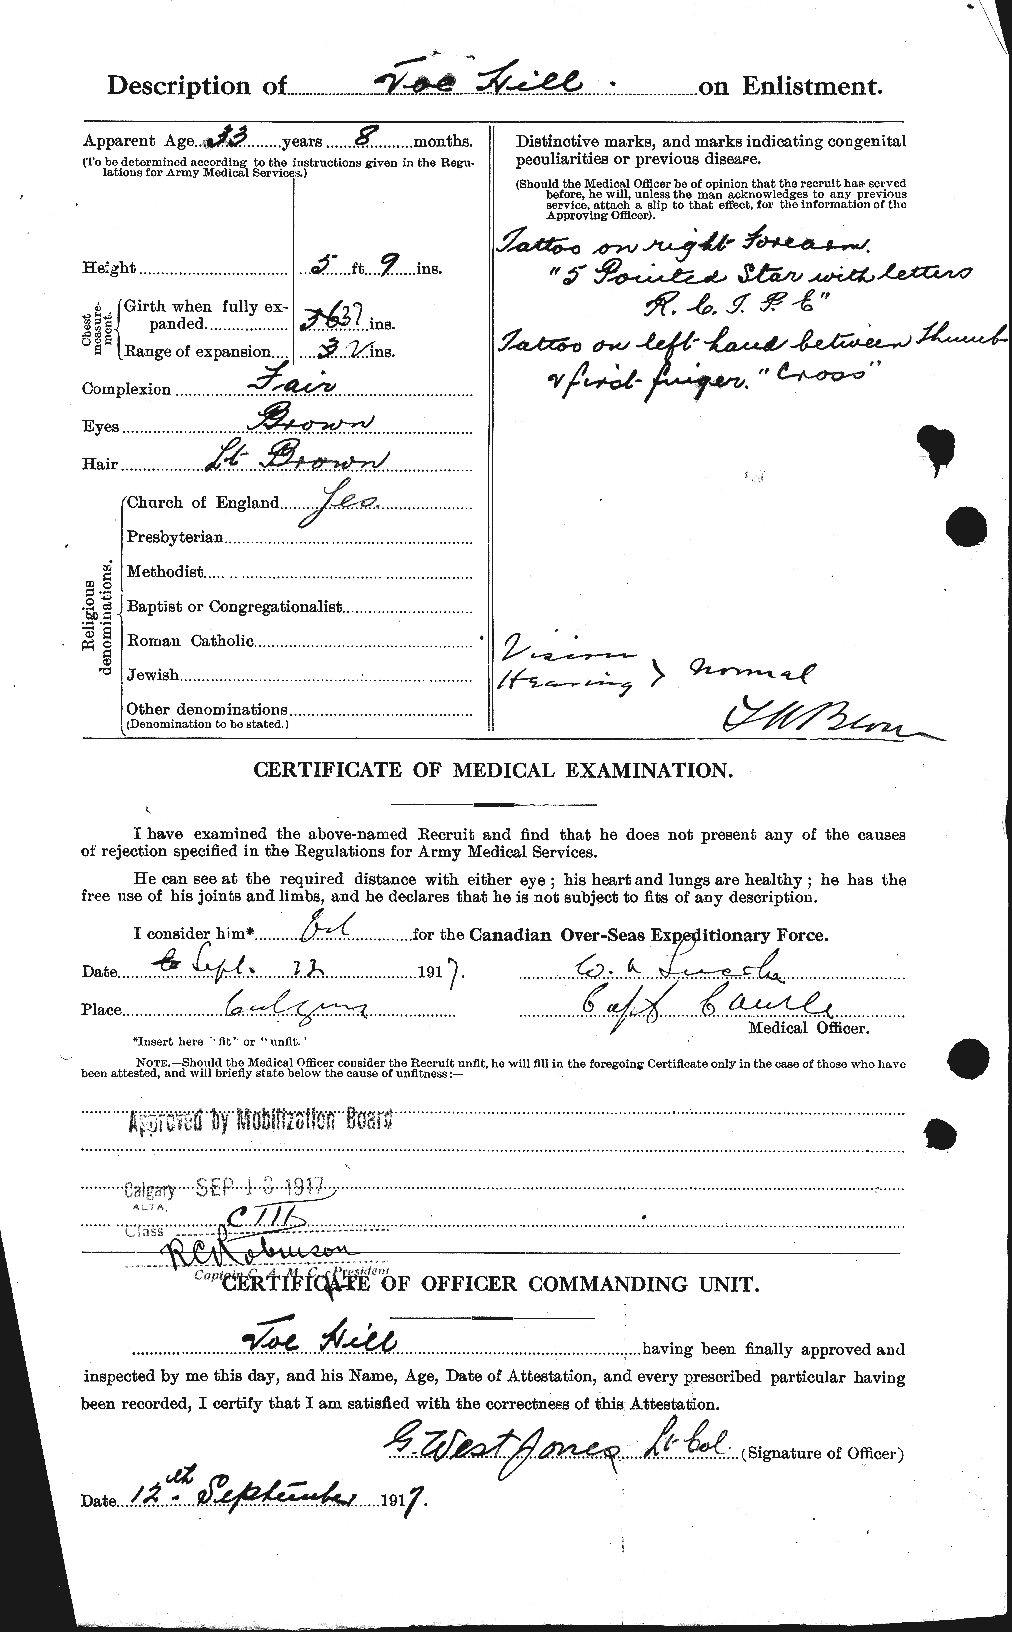 Personnel Records of the First World War - CEF 398712b